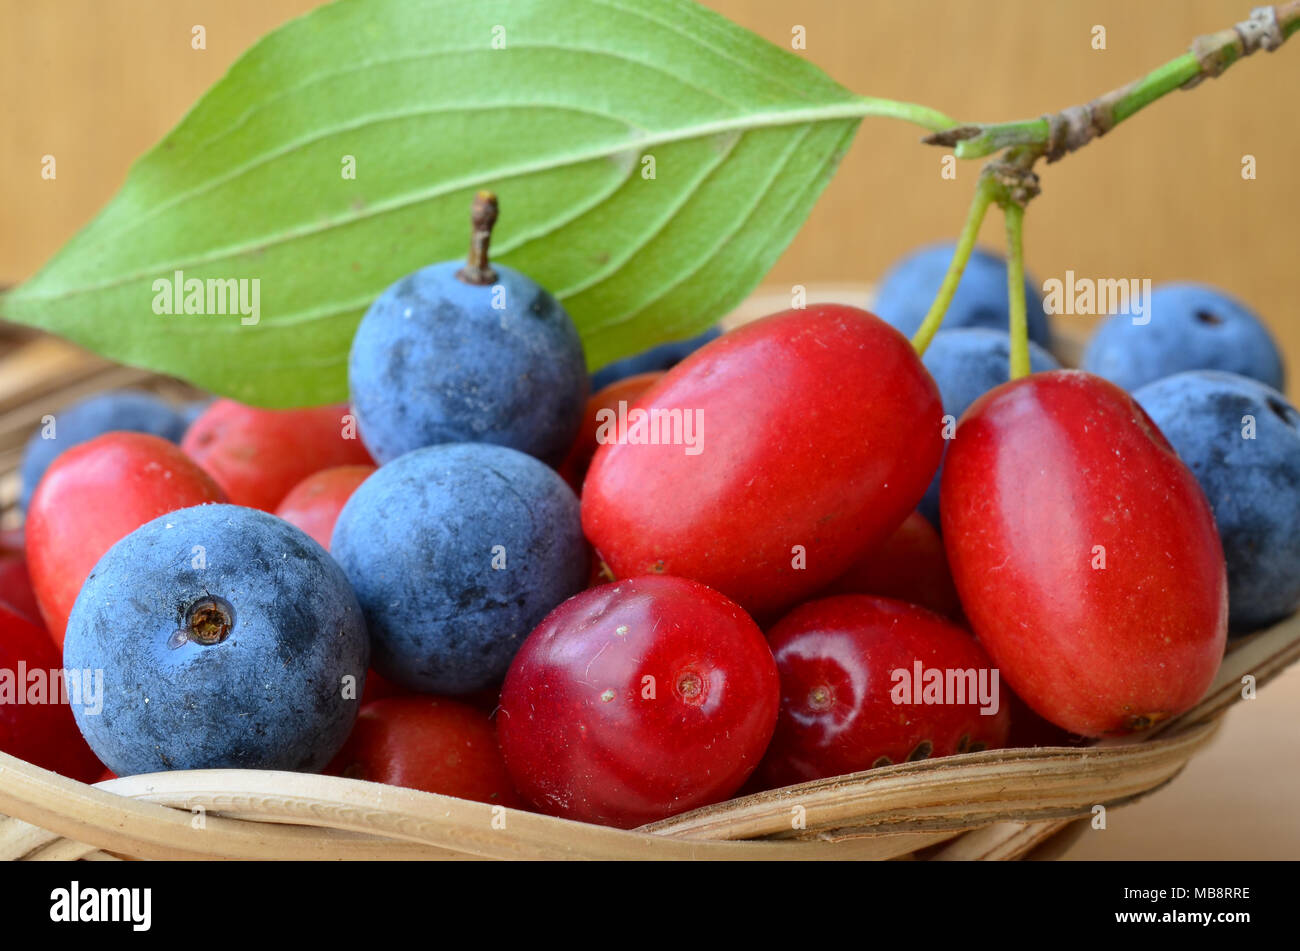 Close up view of curative and healthy Cornelian cherries and Blackthorn berries in a wicker basket Stock Photo